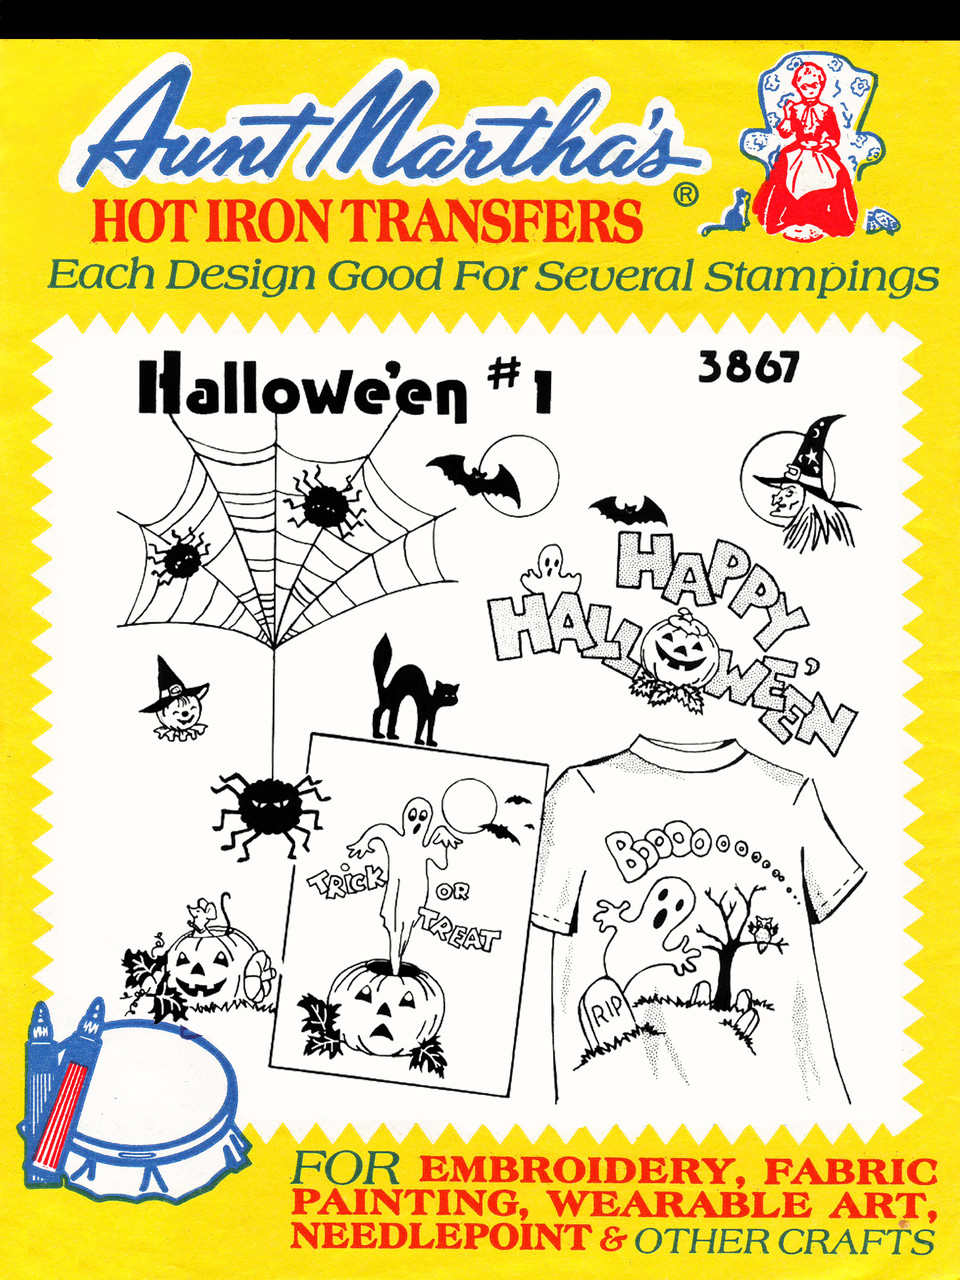 Aunt Martha's Iron-On Transfer Book A Holiday for Every Season